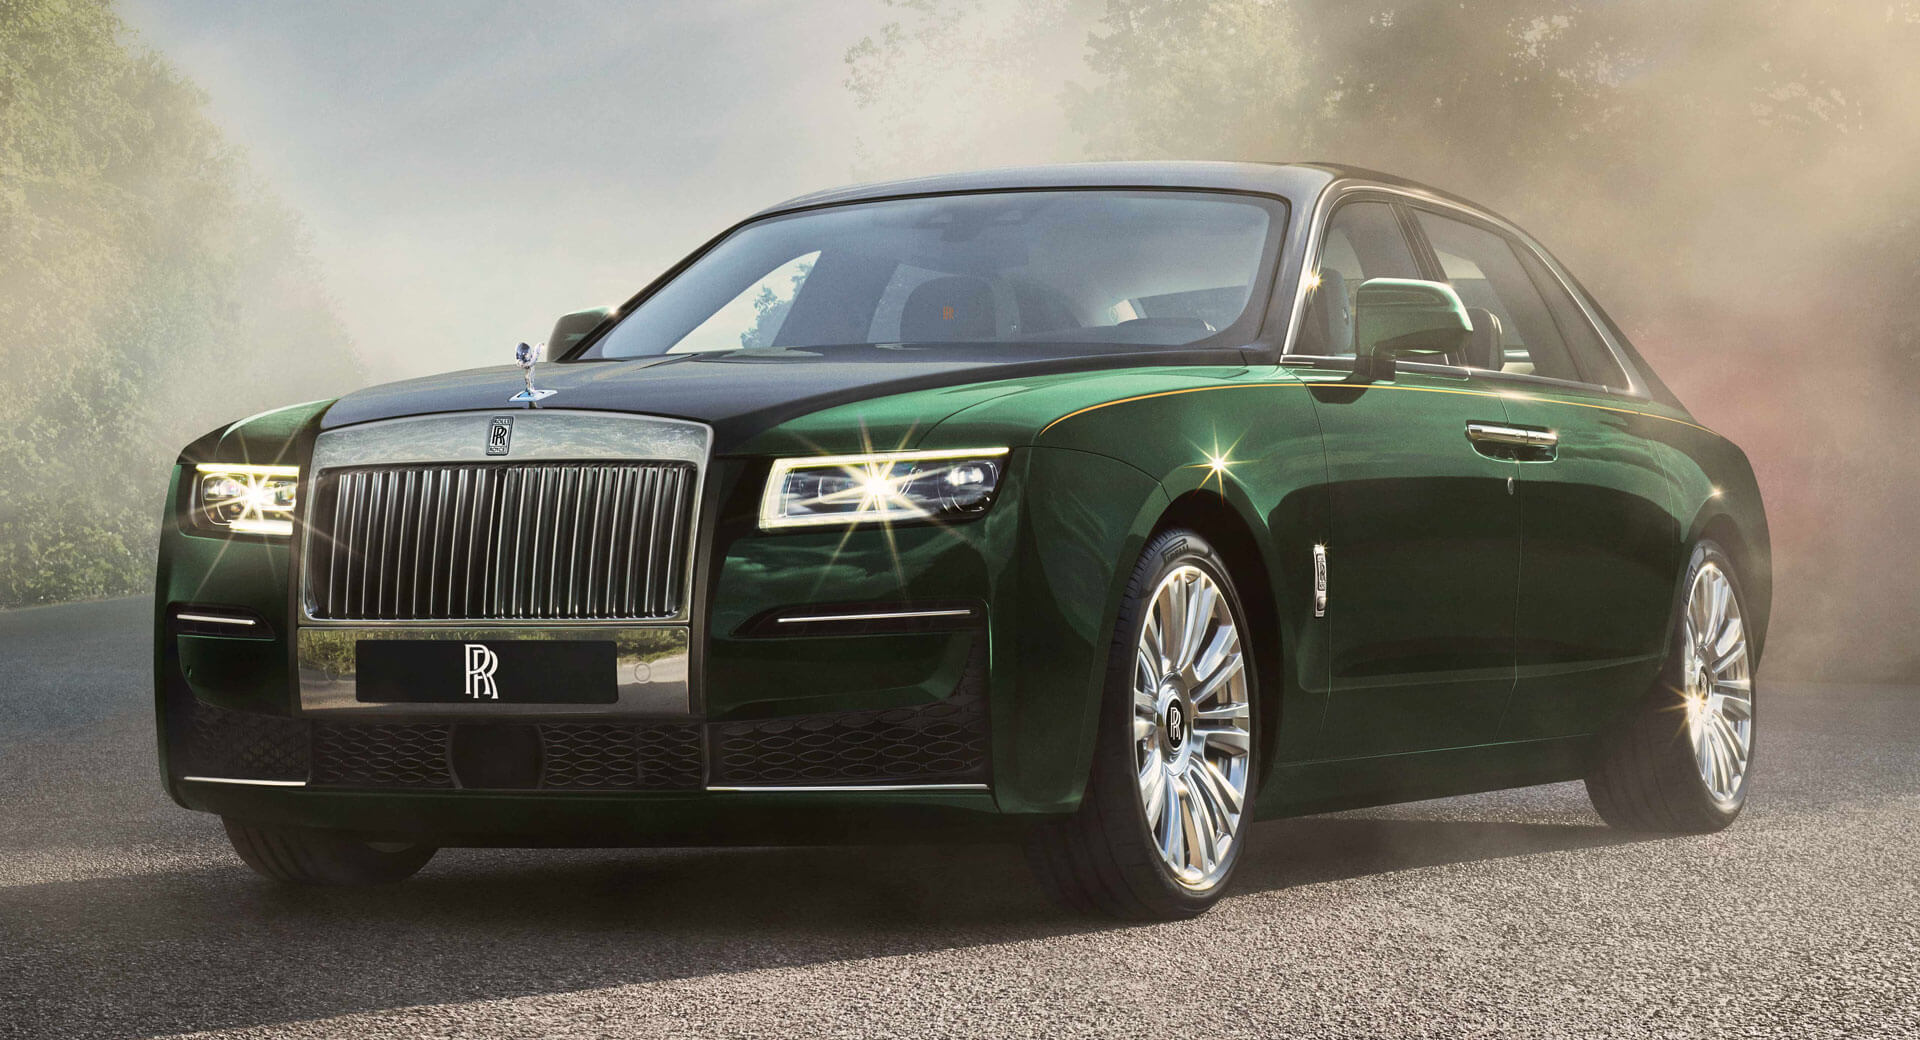 Rolls Royce Names New Model Ghost Production To Begin Later This Year ...